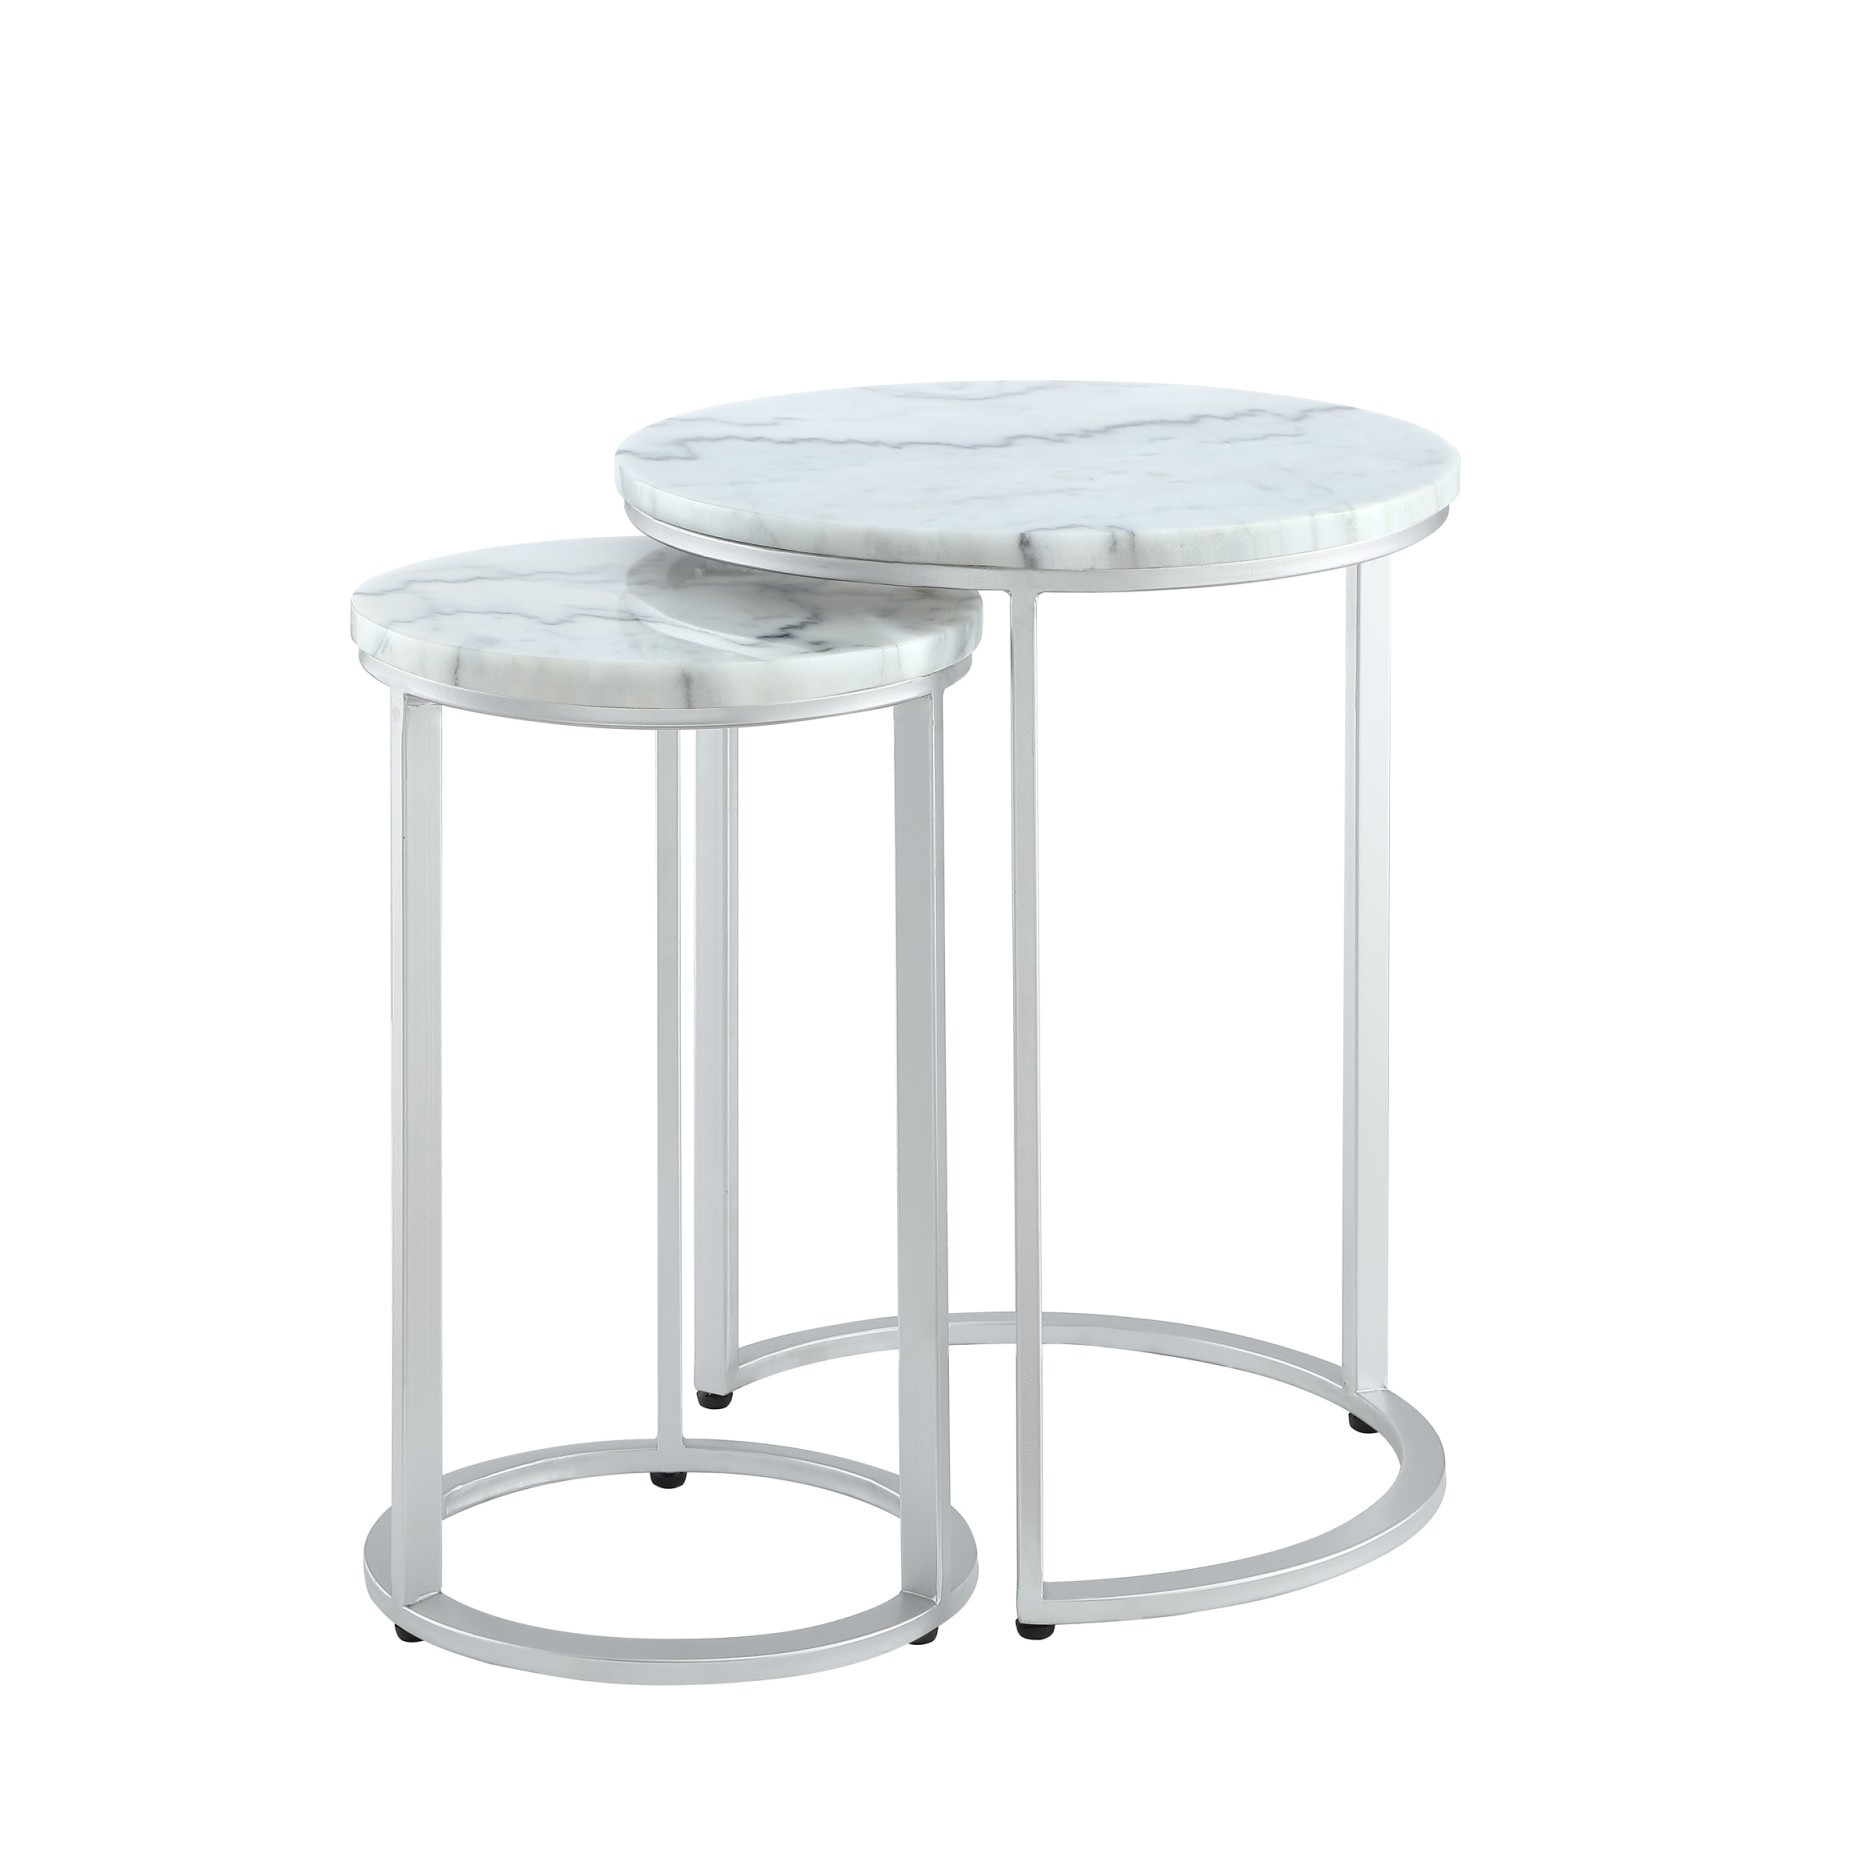 Set of Two 22" Silver and White Marble Round Nested Tables-543884-1